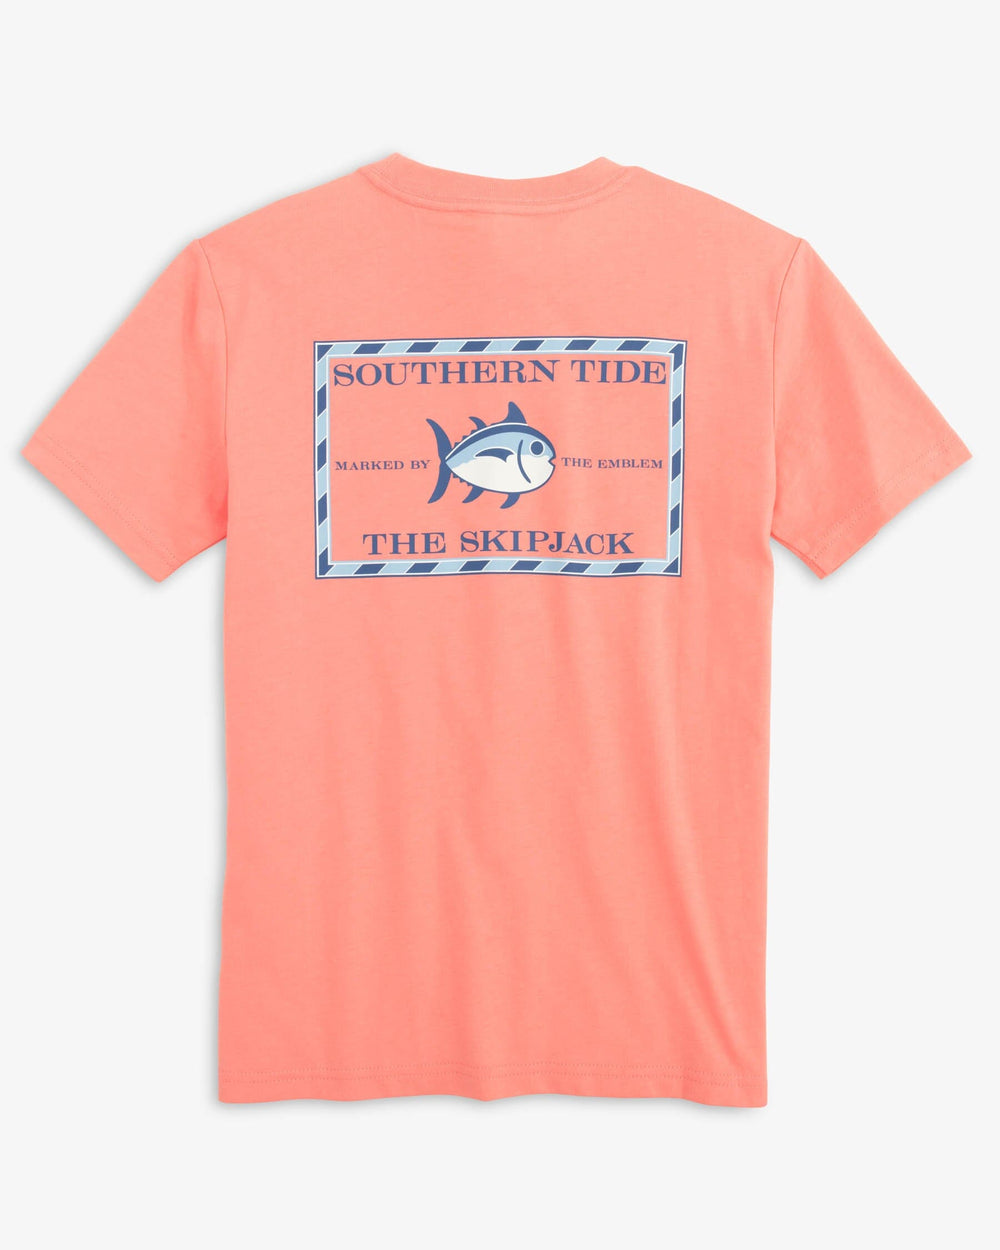 The back view of the Southern Tide Youth Original Skipjack T-Shirt by Southern Tide - Flamingo Pink